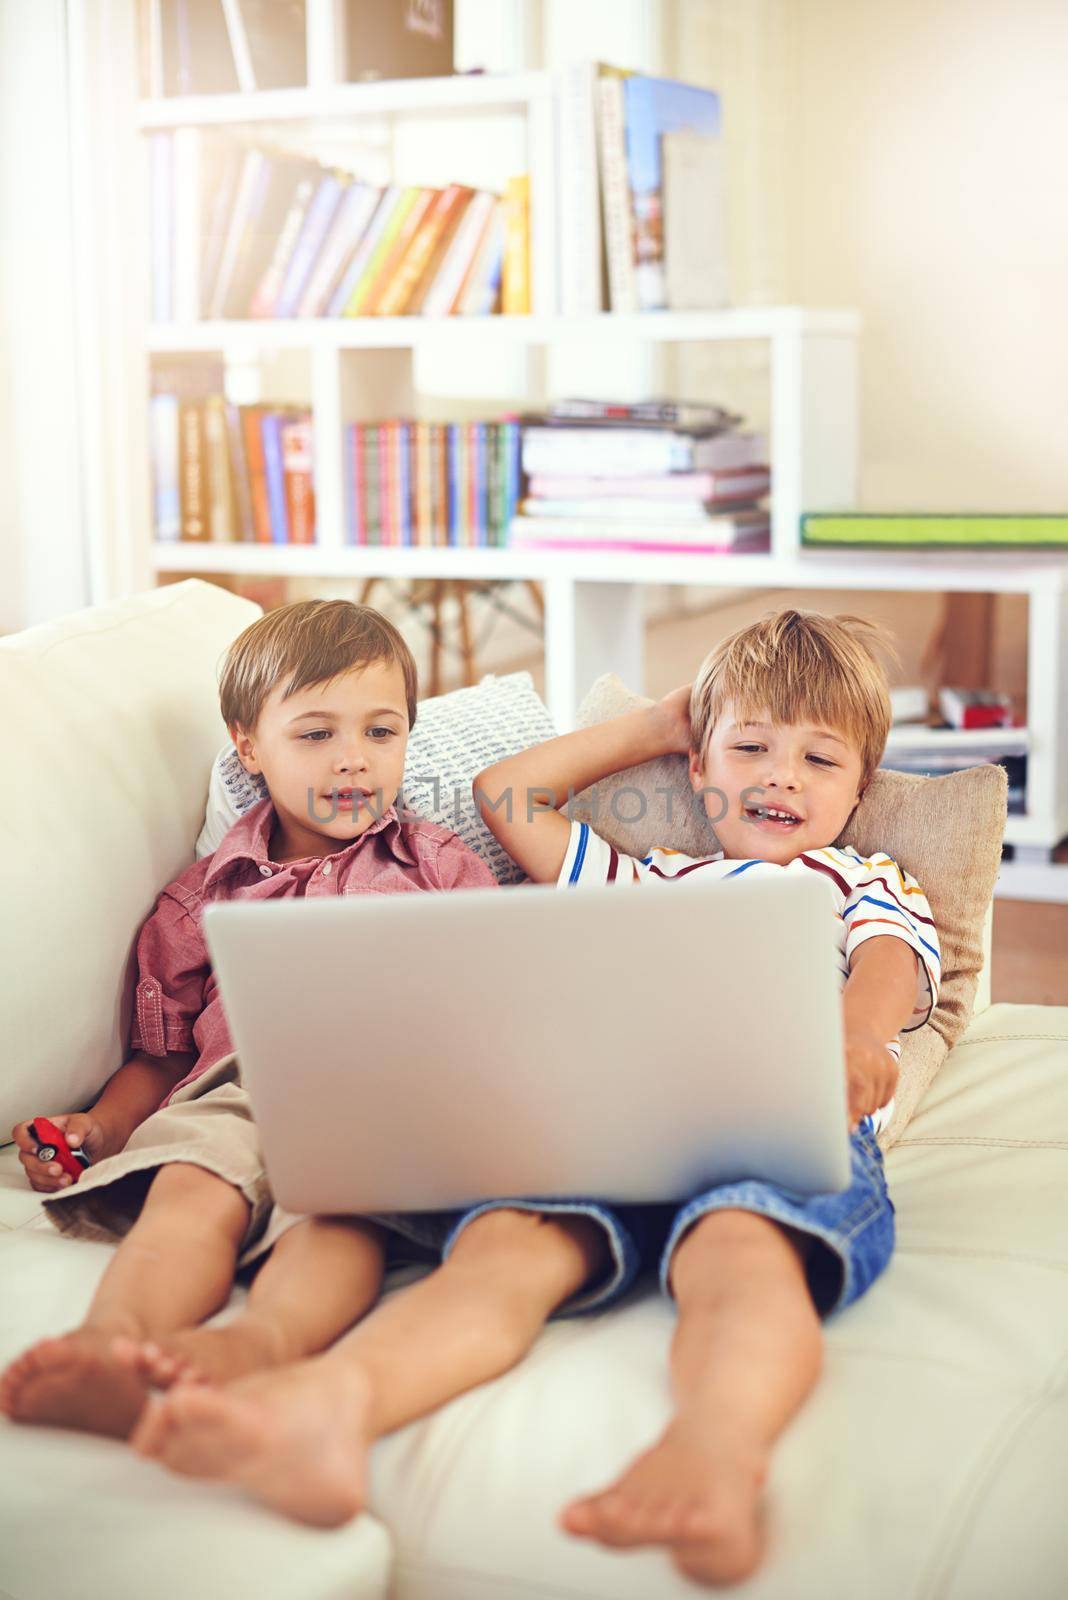 Learning about technology during playtime. two little boys using a laptop together. by YuriArcurs